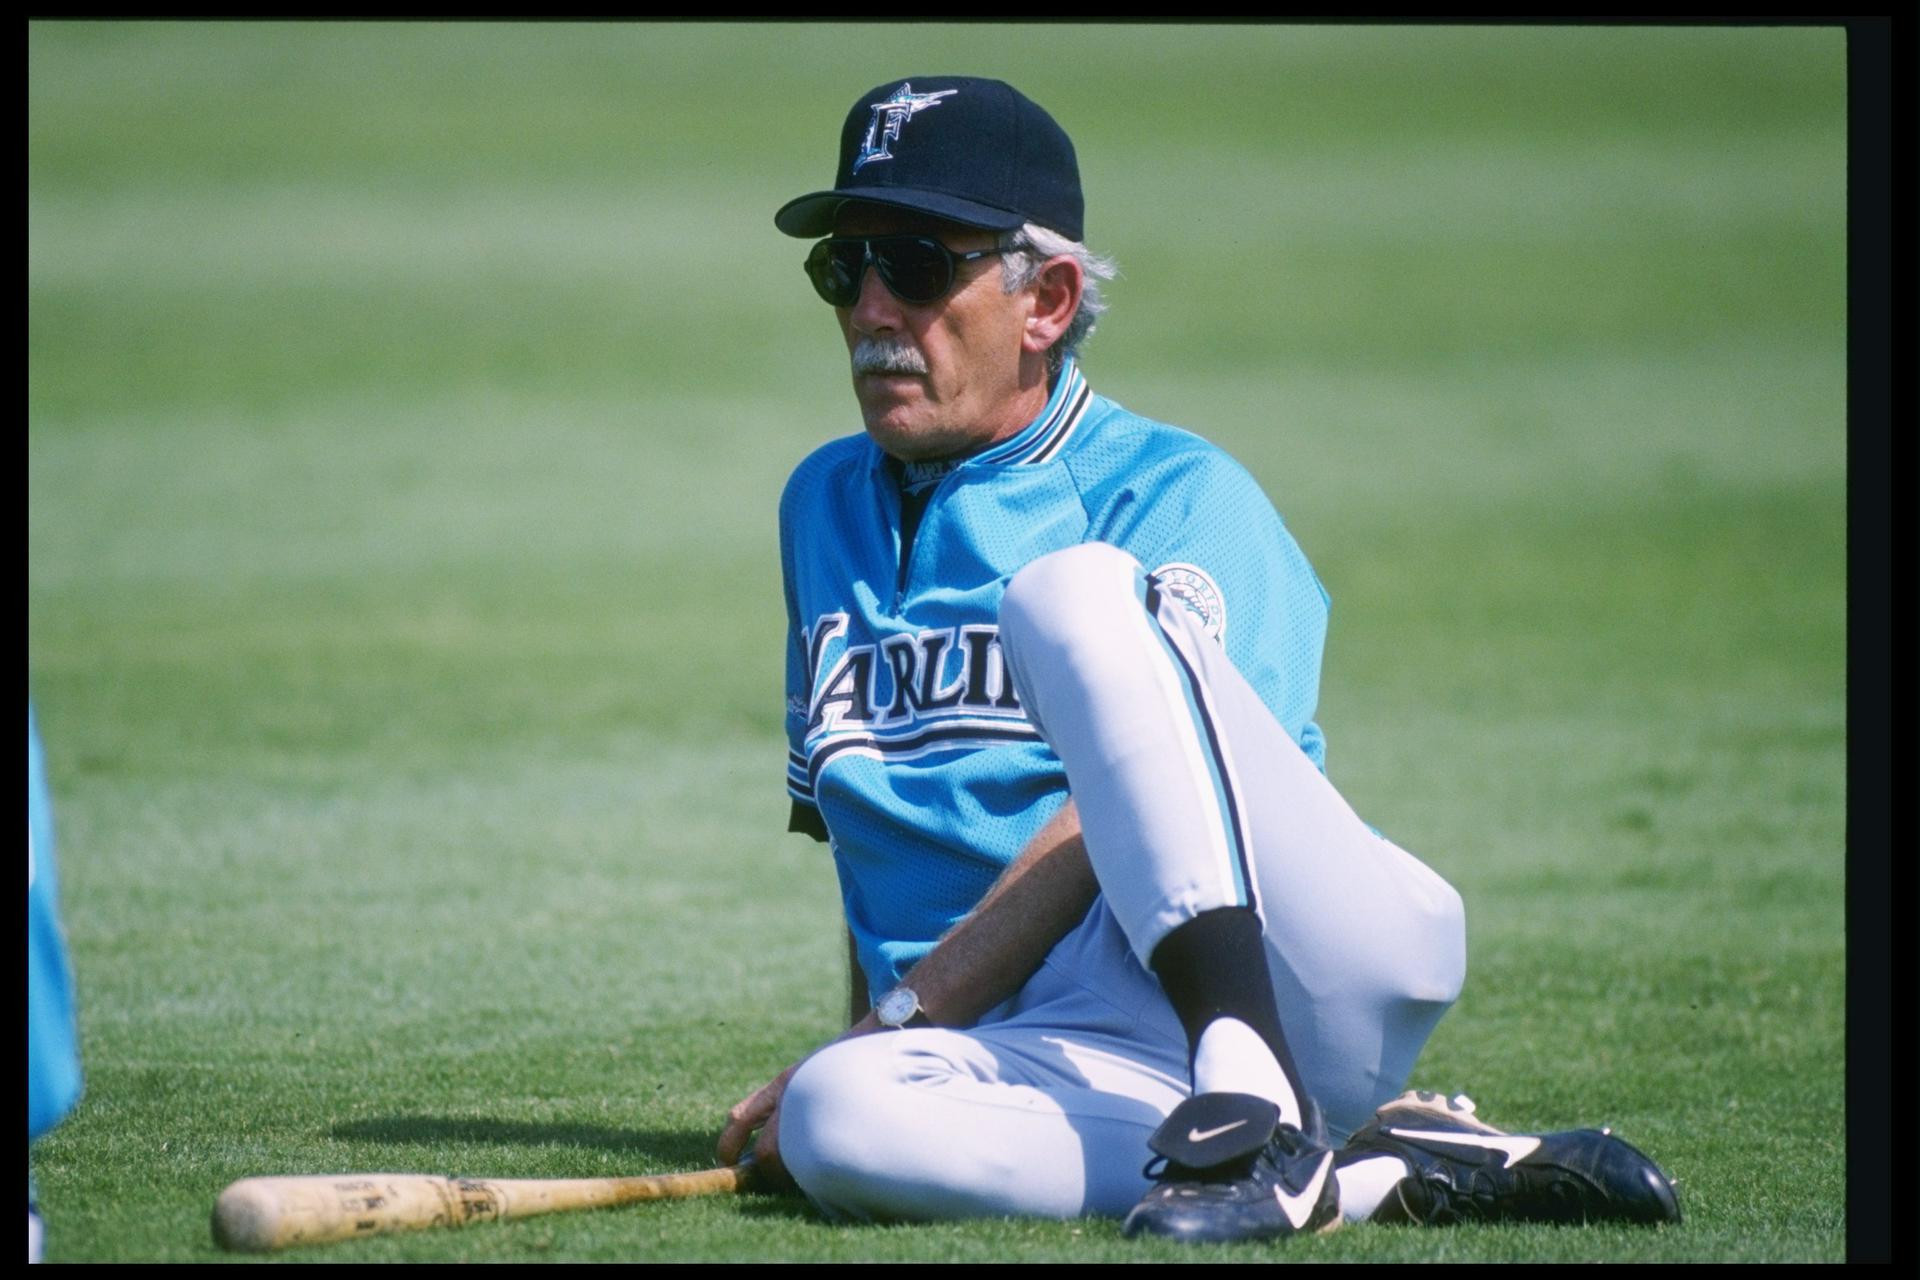 Former Marlins manager Jim Leyland sits on the baseball field